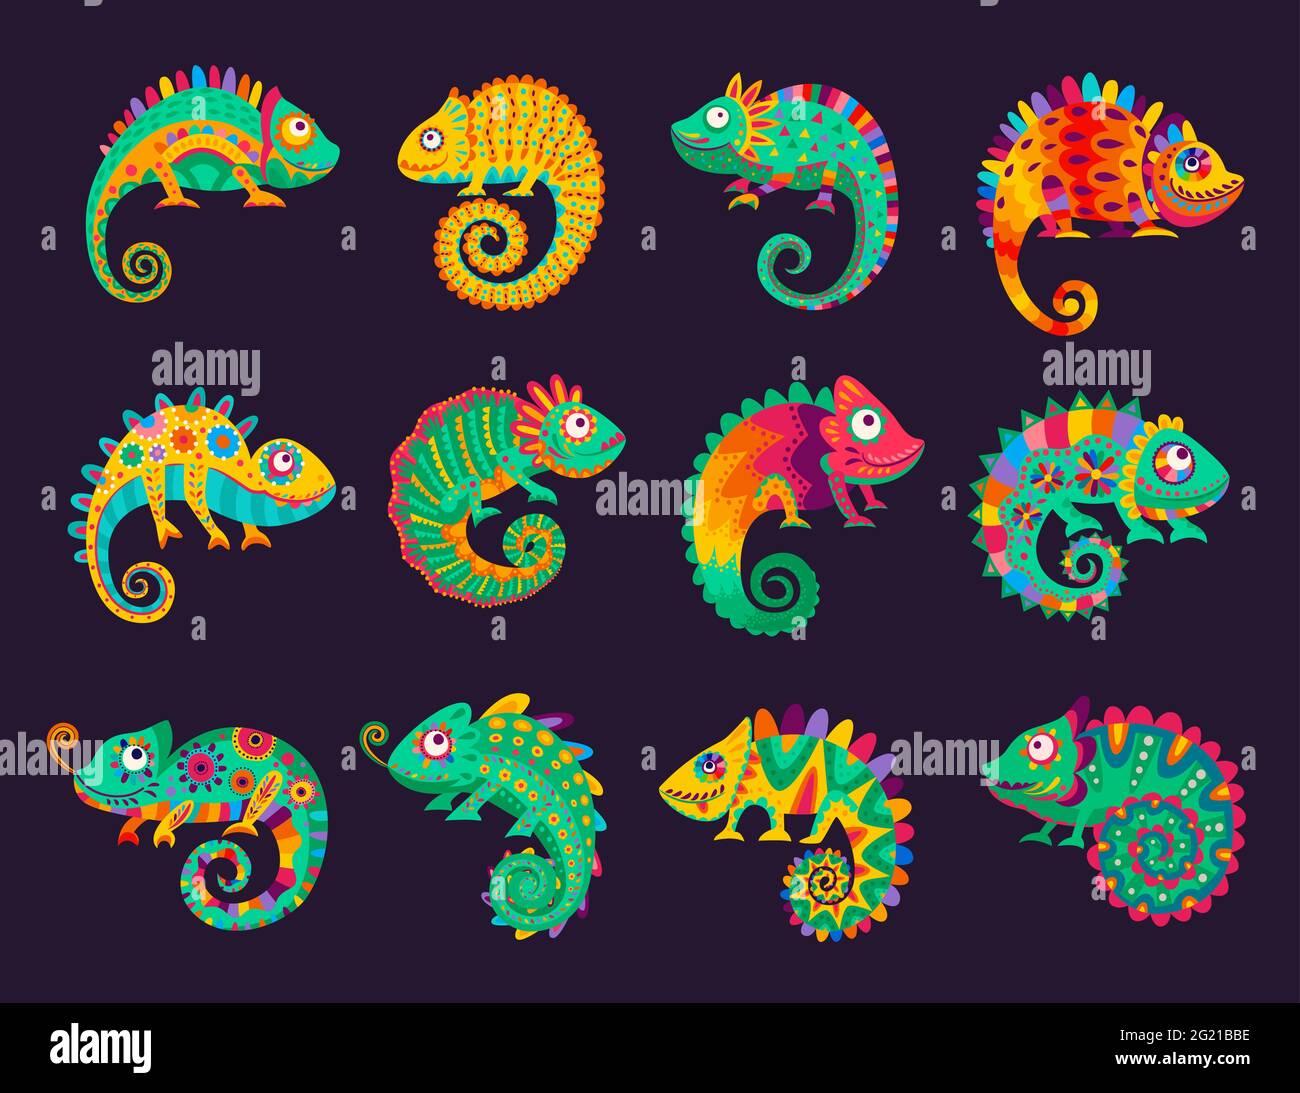 Cartoon mexican chameleons, vector lizards with ornate colorful skin, long curvy tail, tongue and telescopic eyes. Wild animal, pet, exotic tropical r Stock Vector